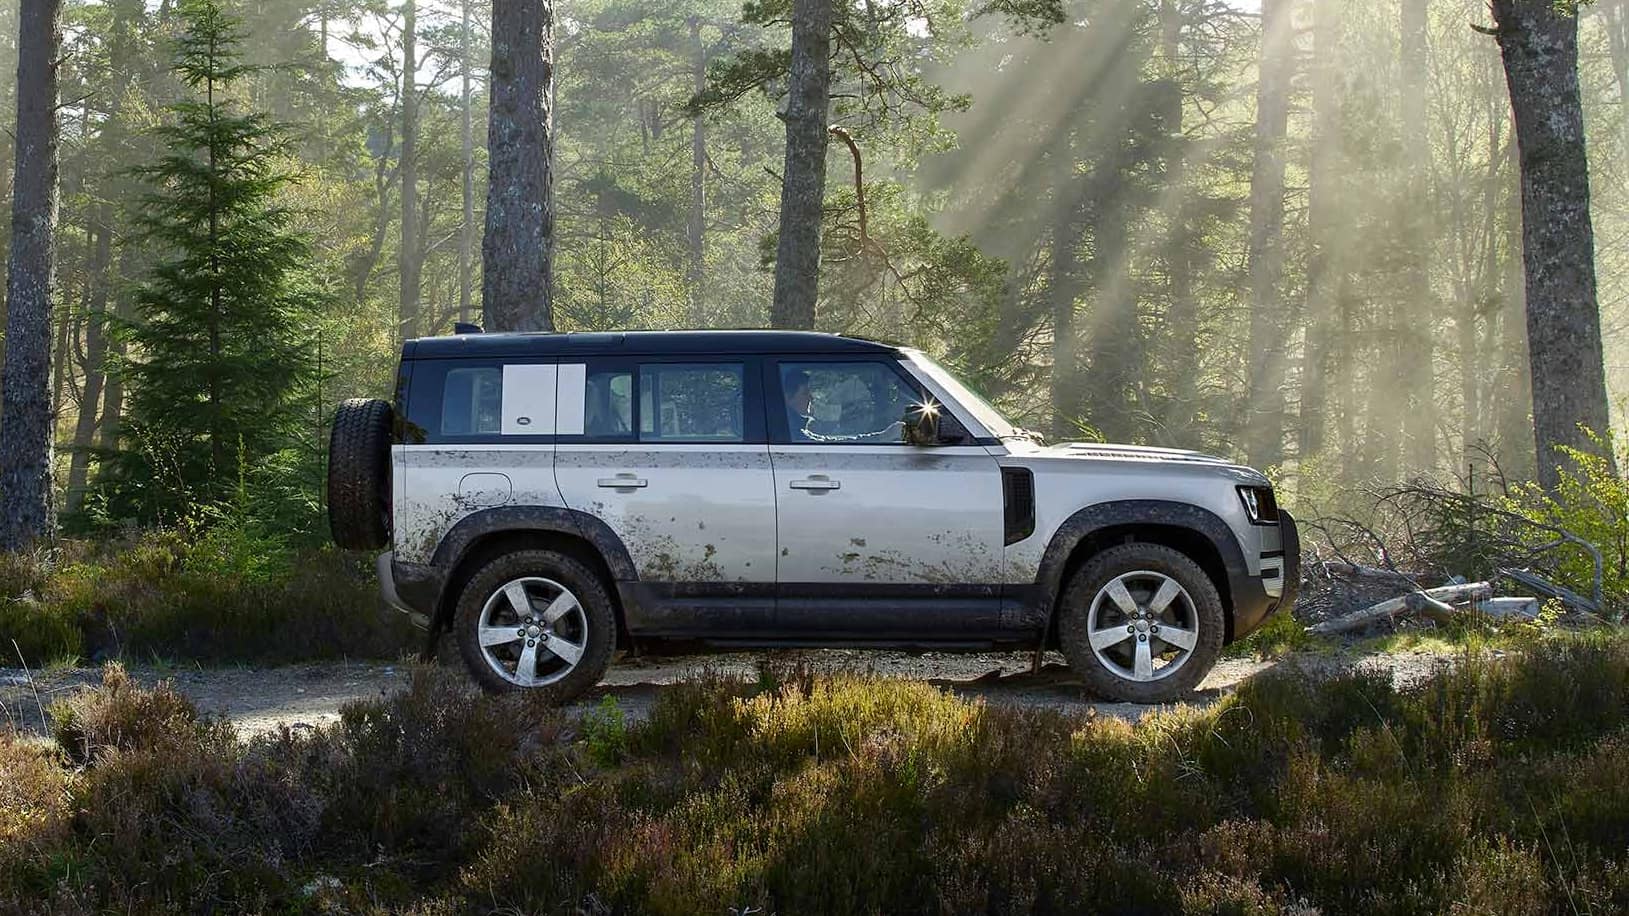 Land Rover Defender profile view in forest background